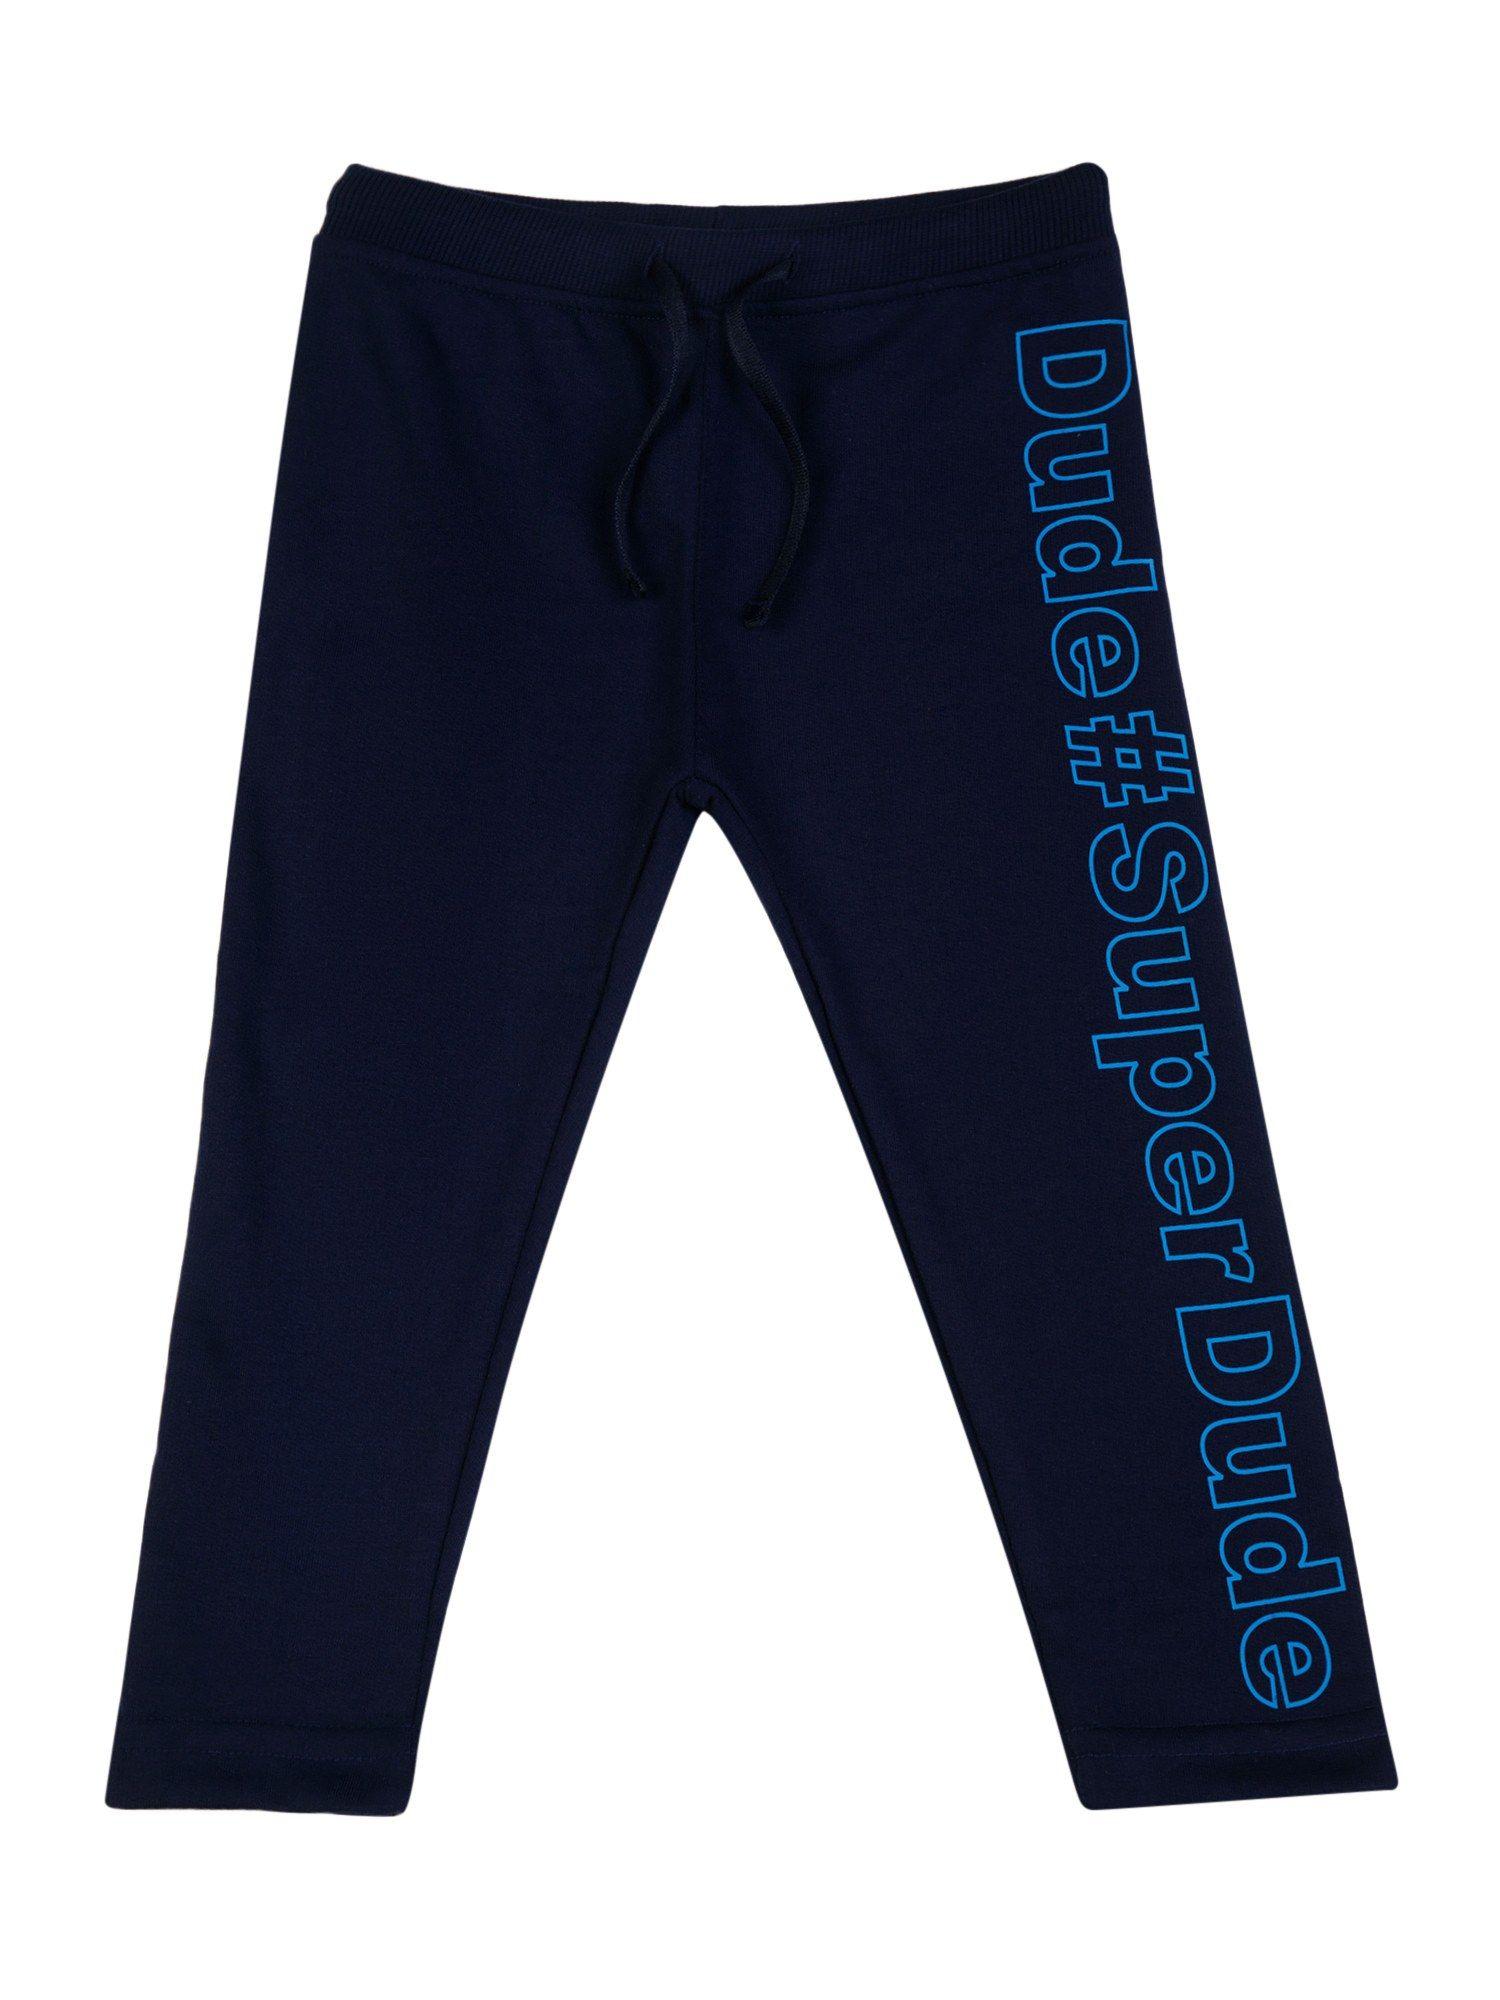 typography track pant-navy blue